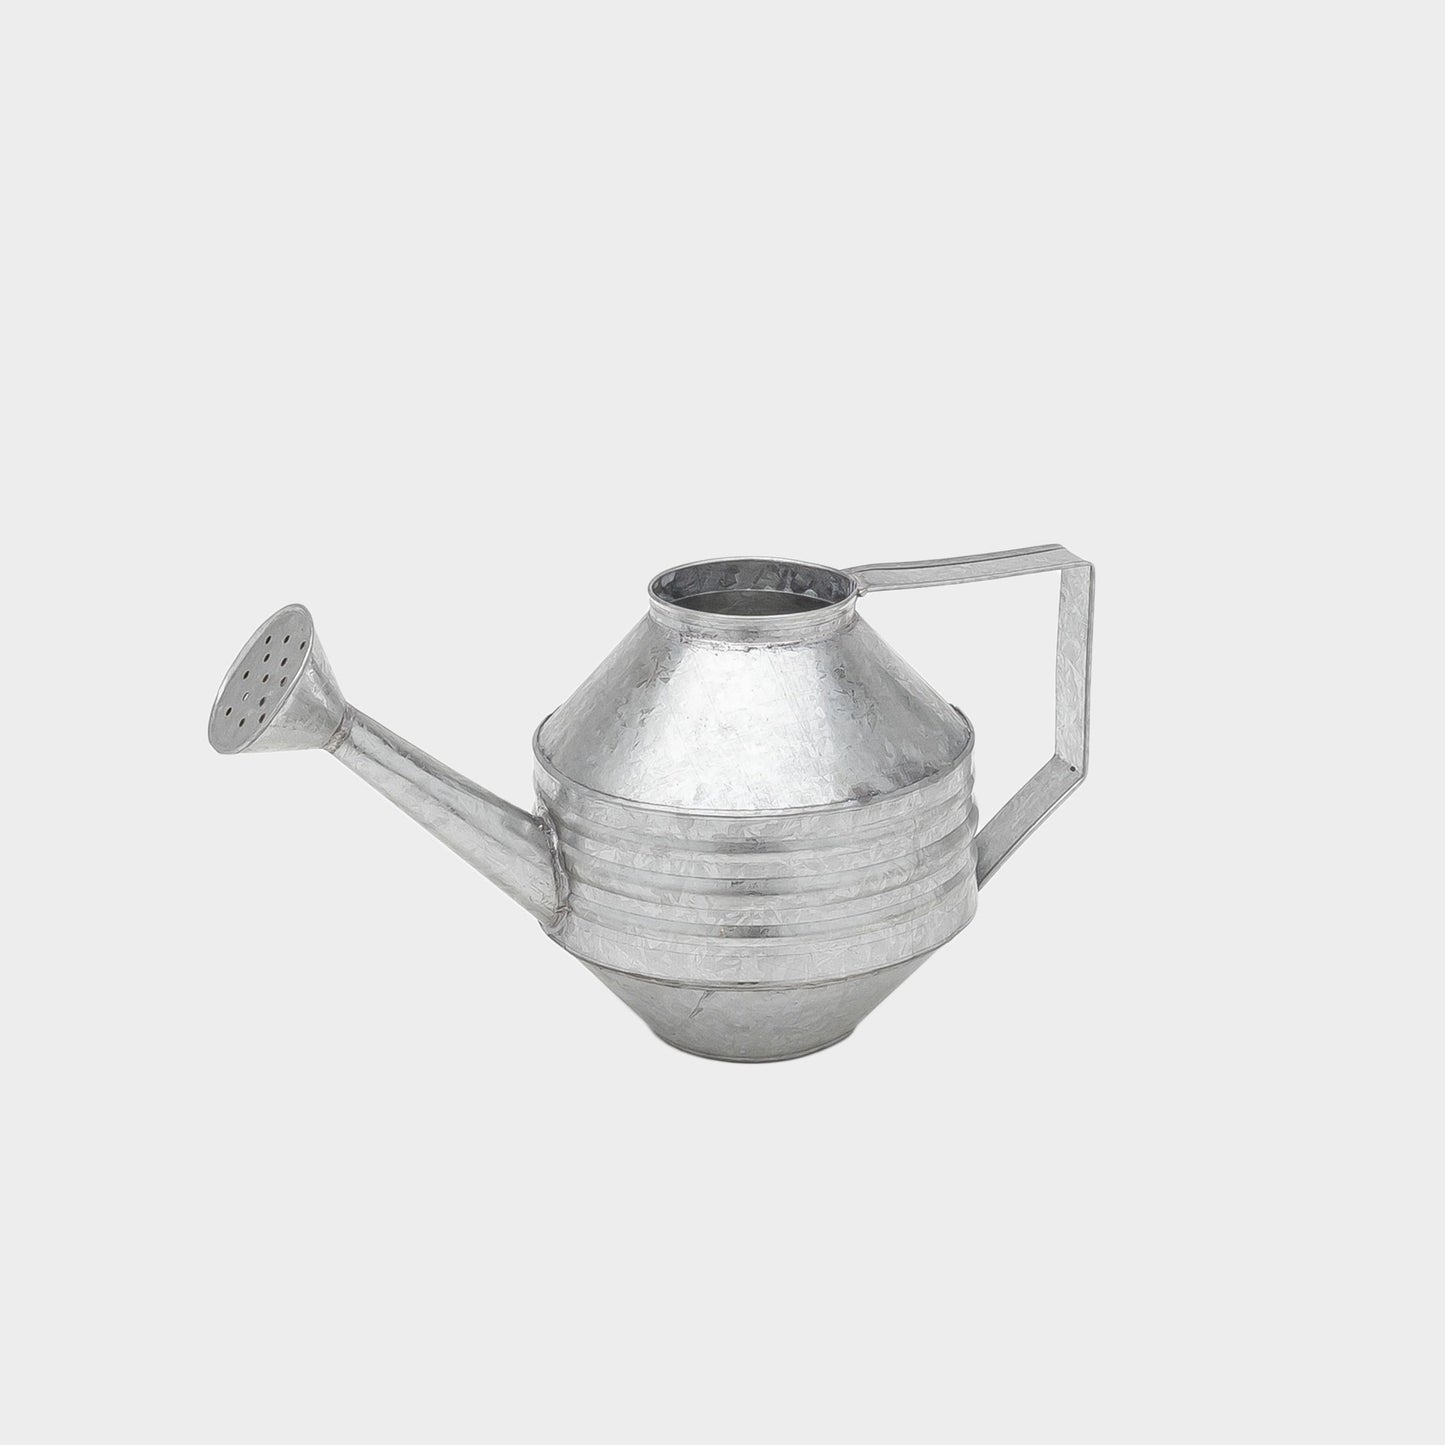 Fabien Cappello Galvanized Tin Watering Can (Regadera #4 and #5)